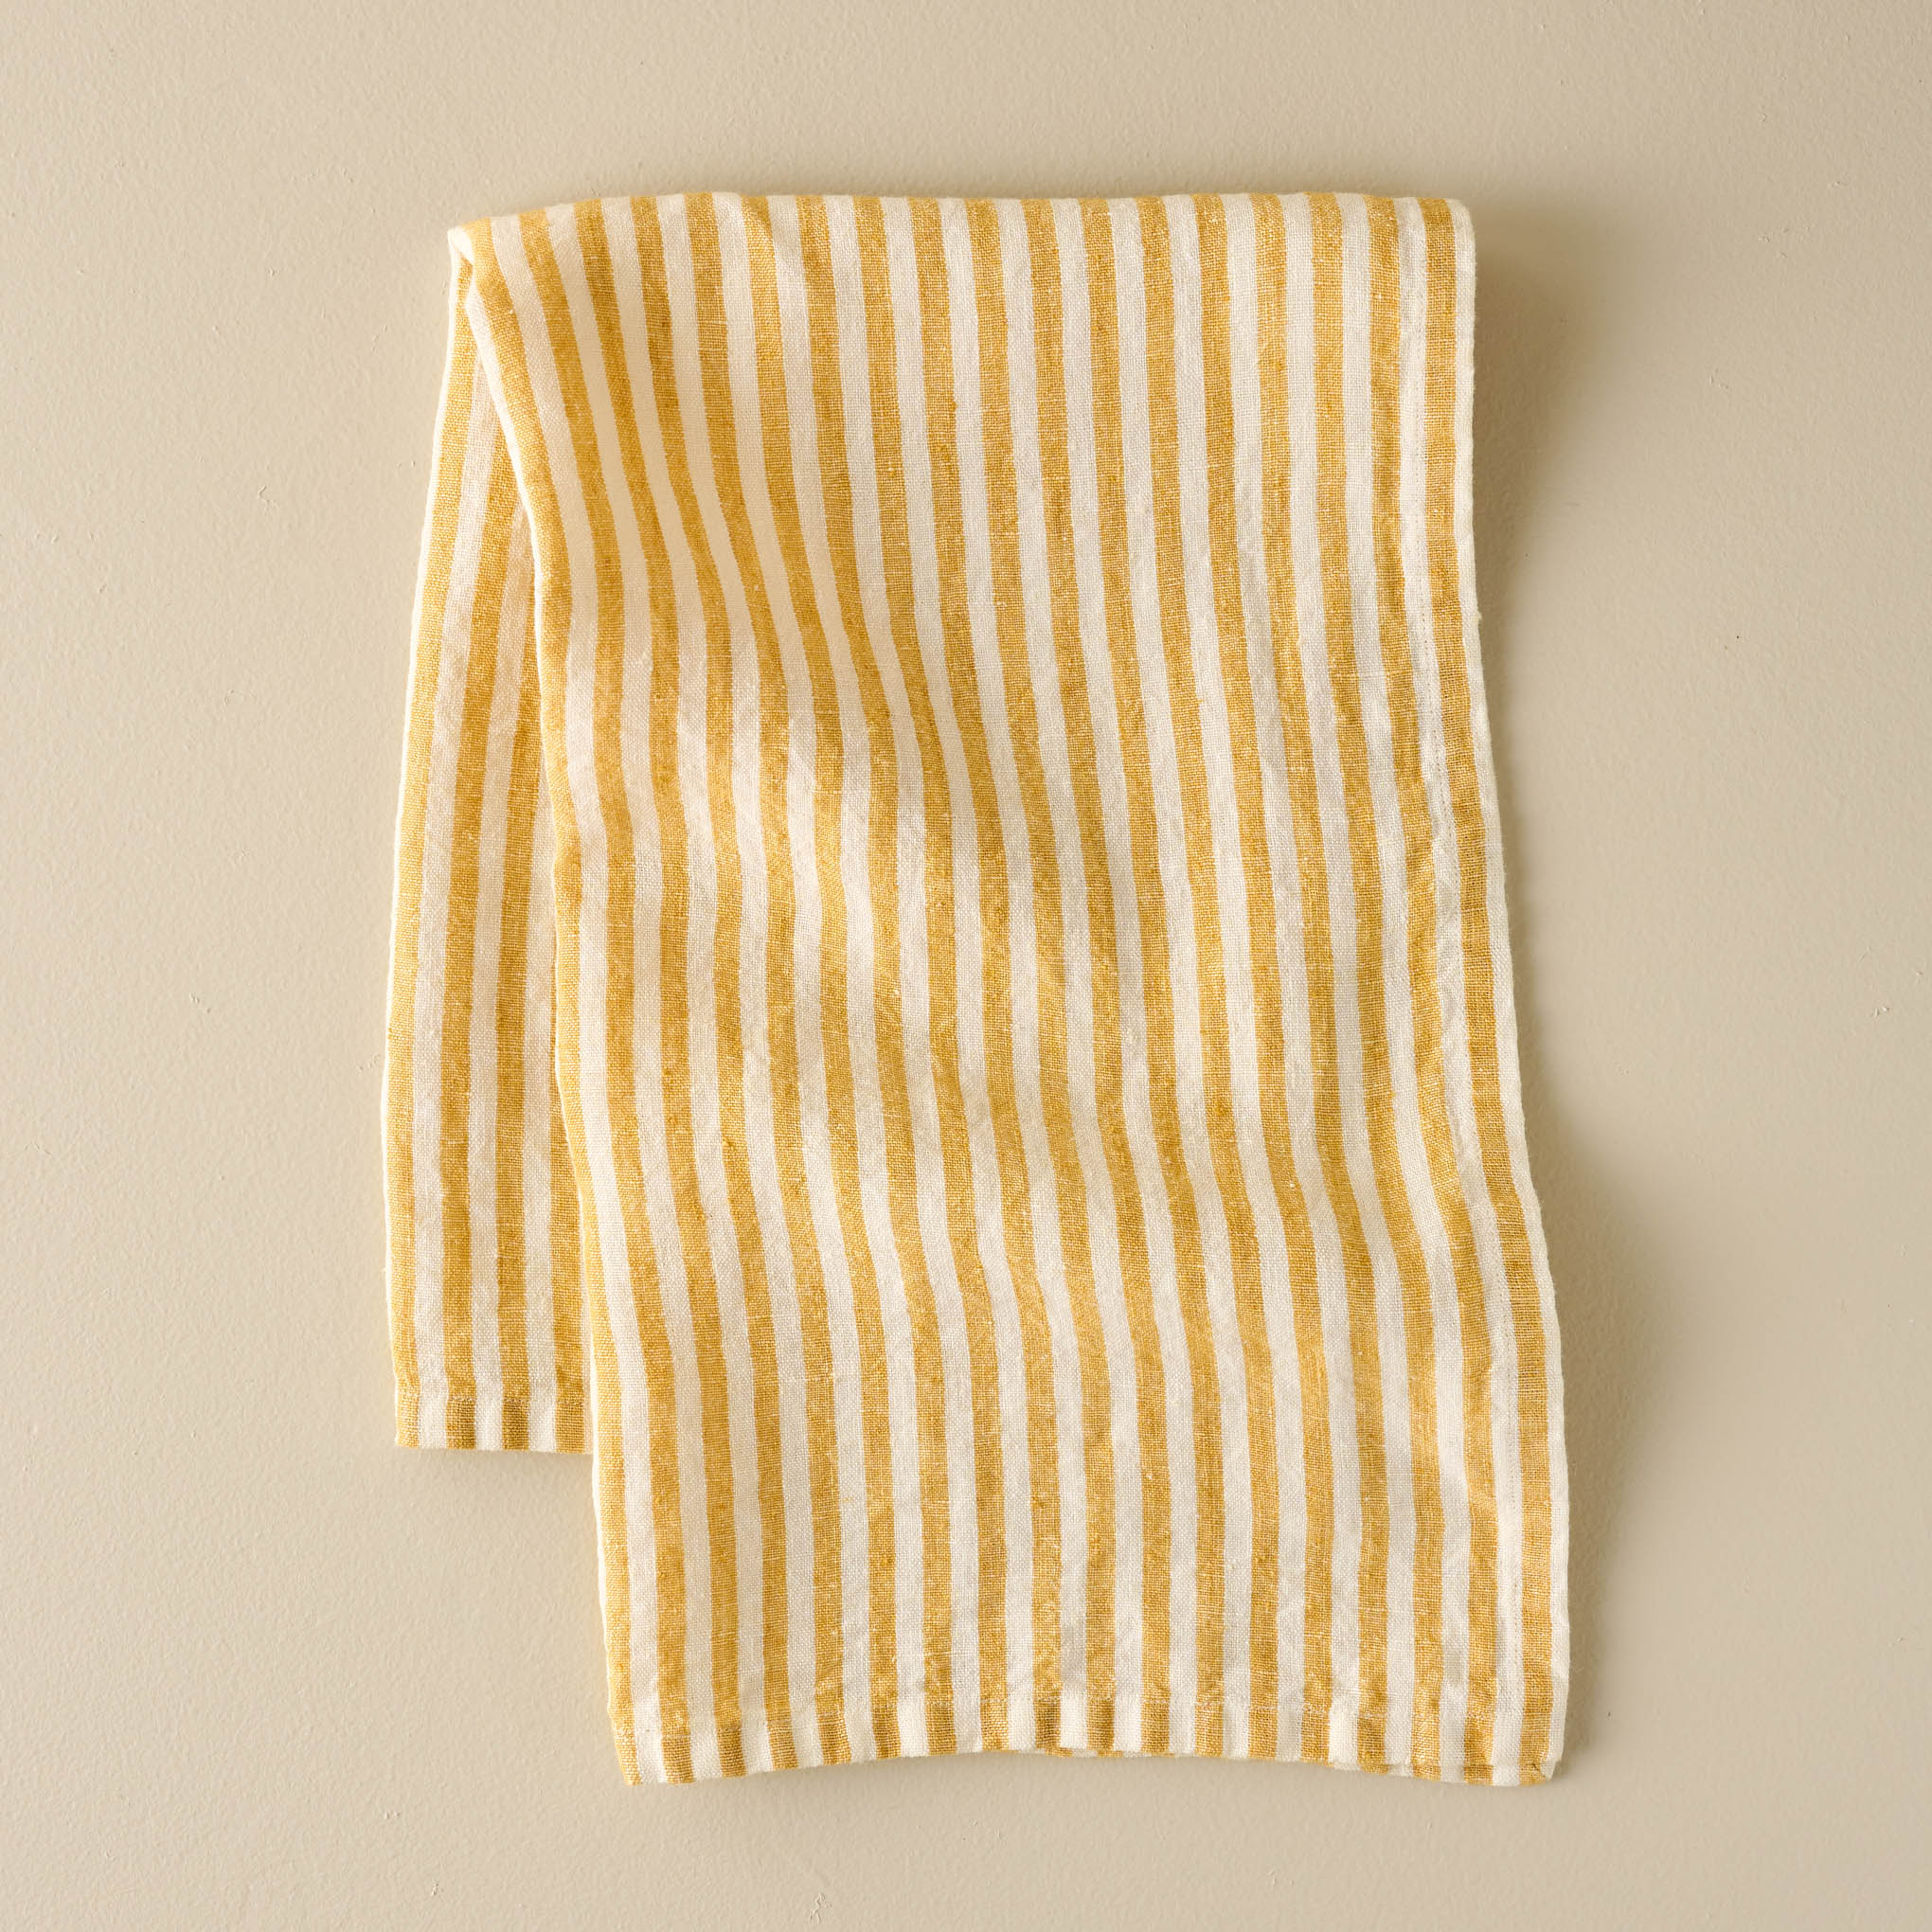 Sunshine Stripe Tea Towel On sale for $12.80, discounted from $16.00